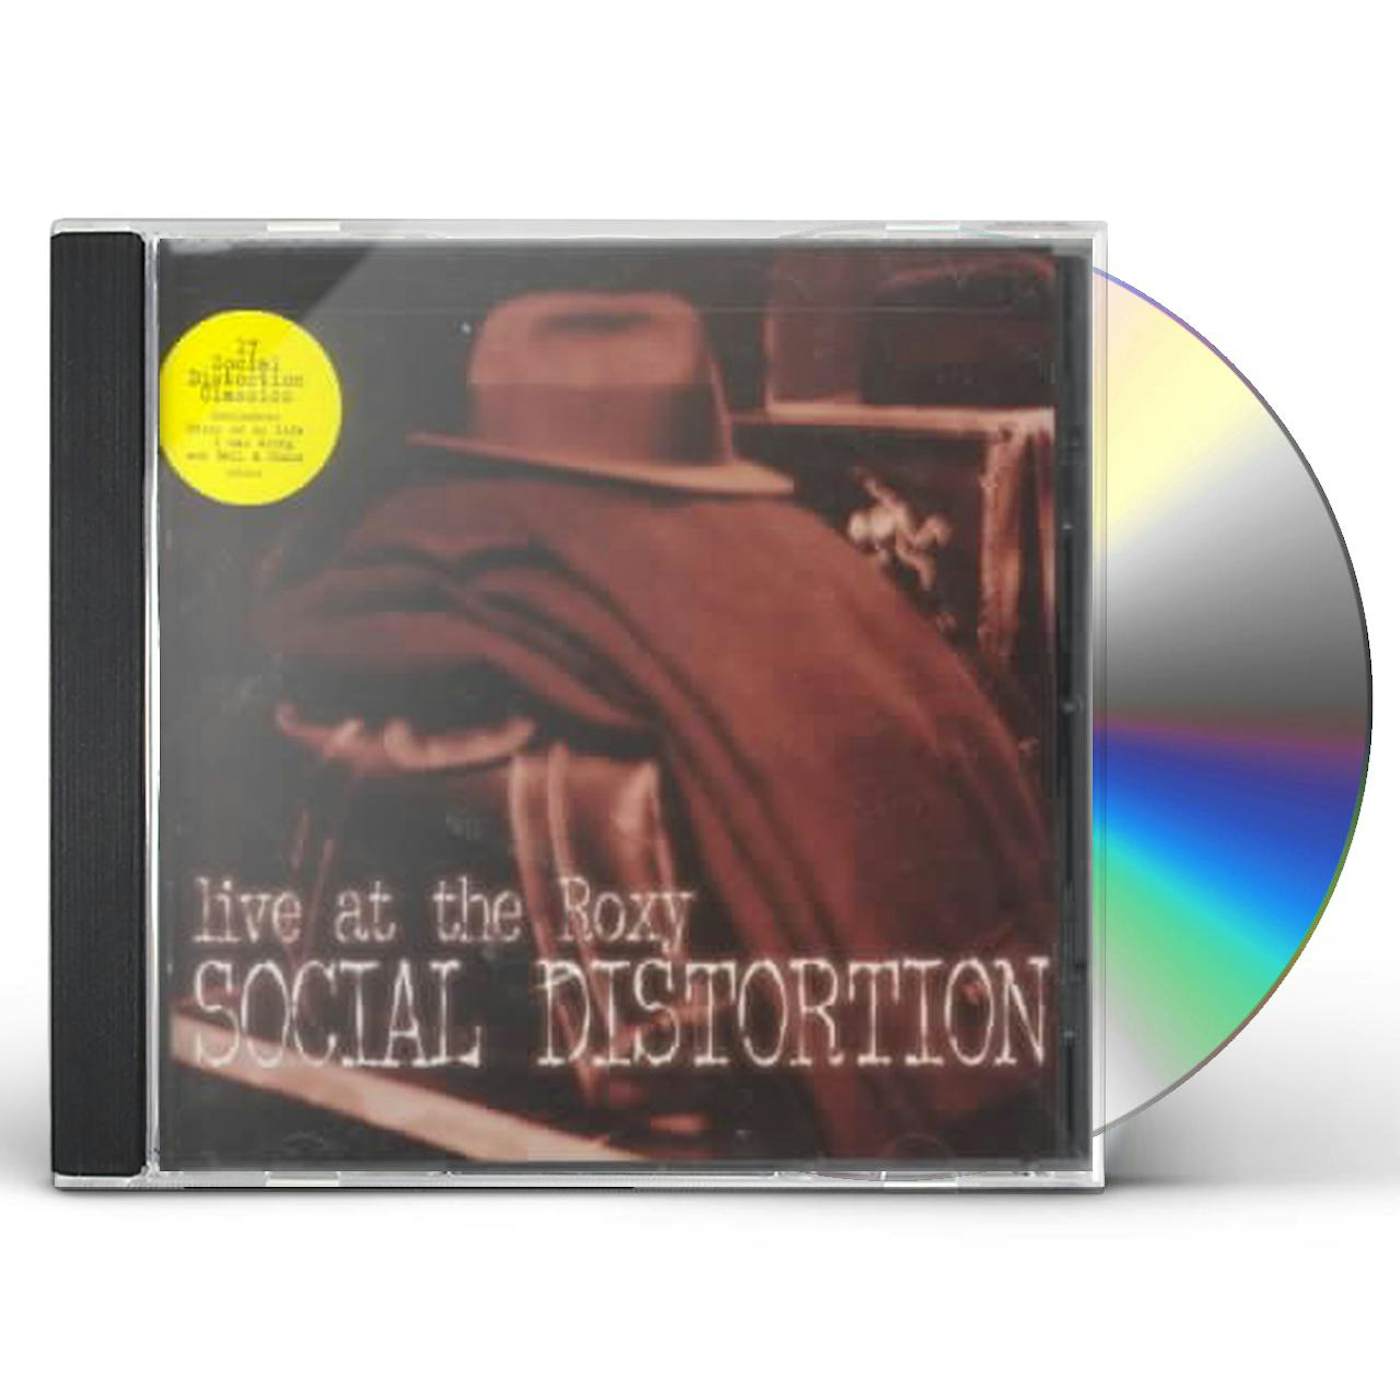 Social Distortion LIVE AT THE ROXY CD